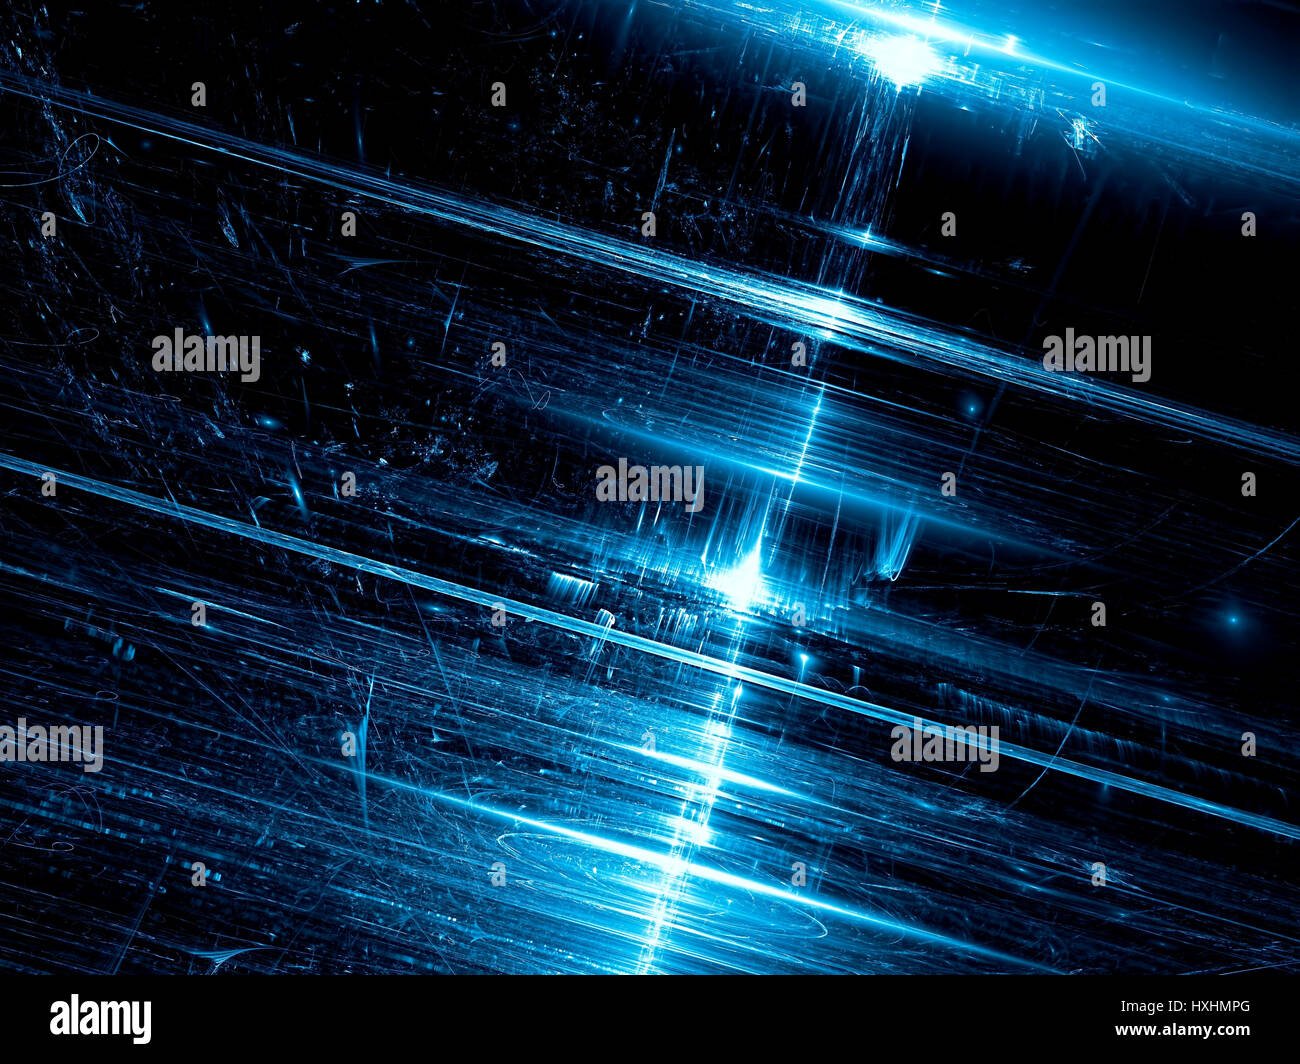 Glossy tech background - abstract digitally generated image Stock Photo